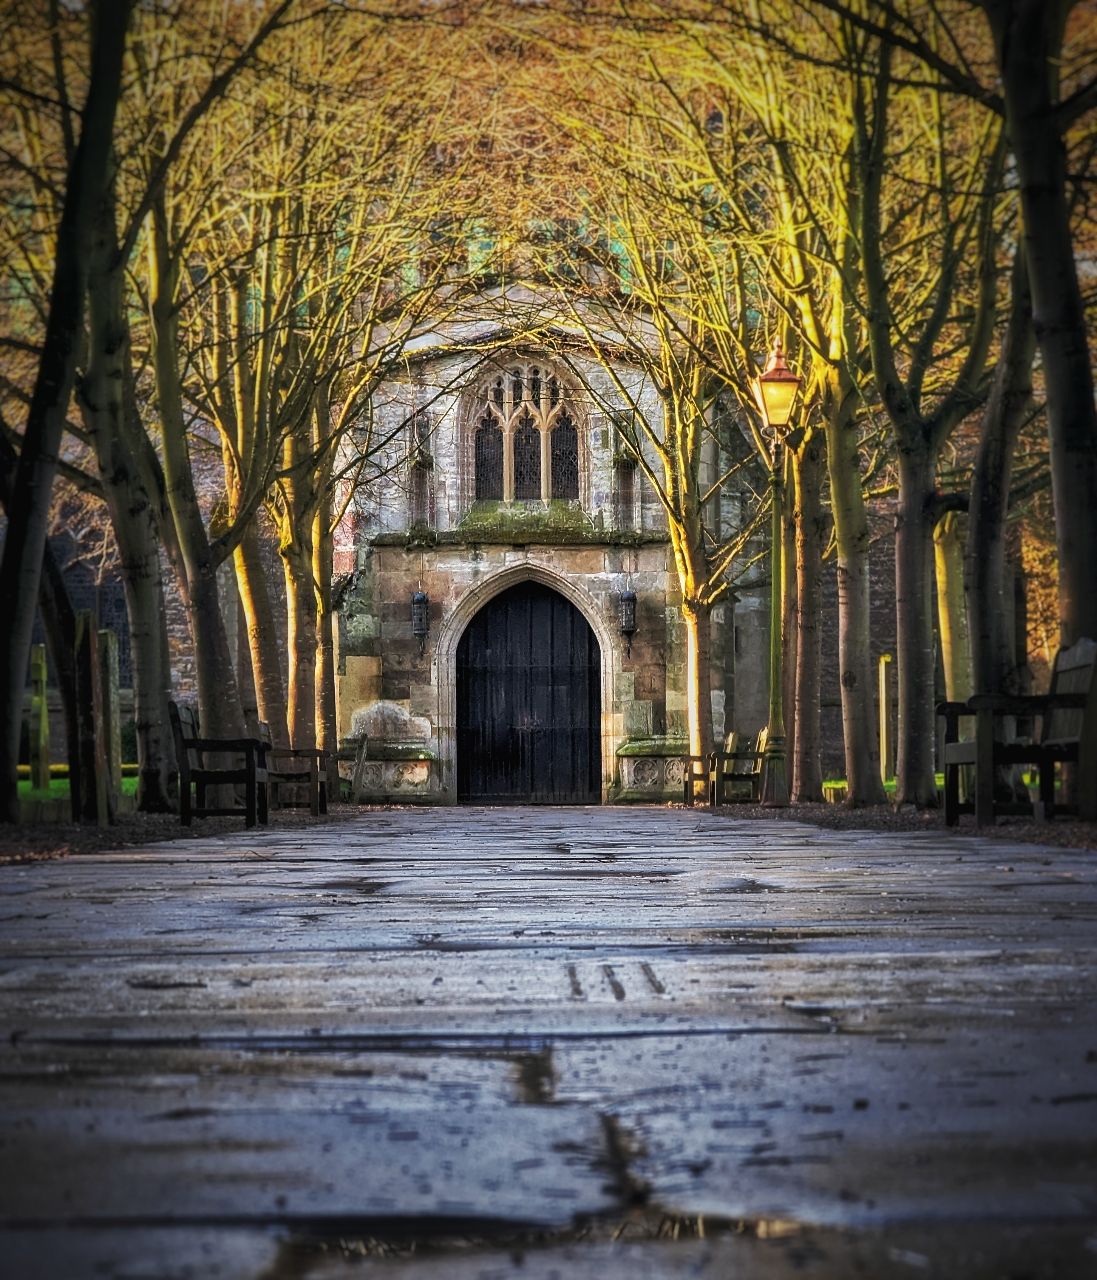 Holy Trinity Church - From The Dell Forest Garden, United Kingdom